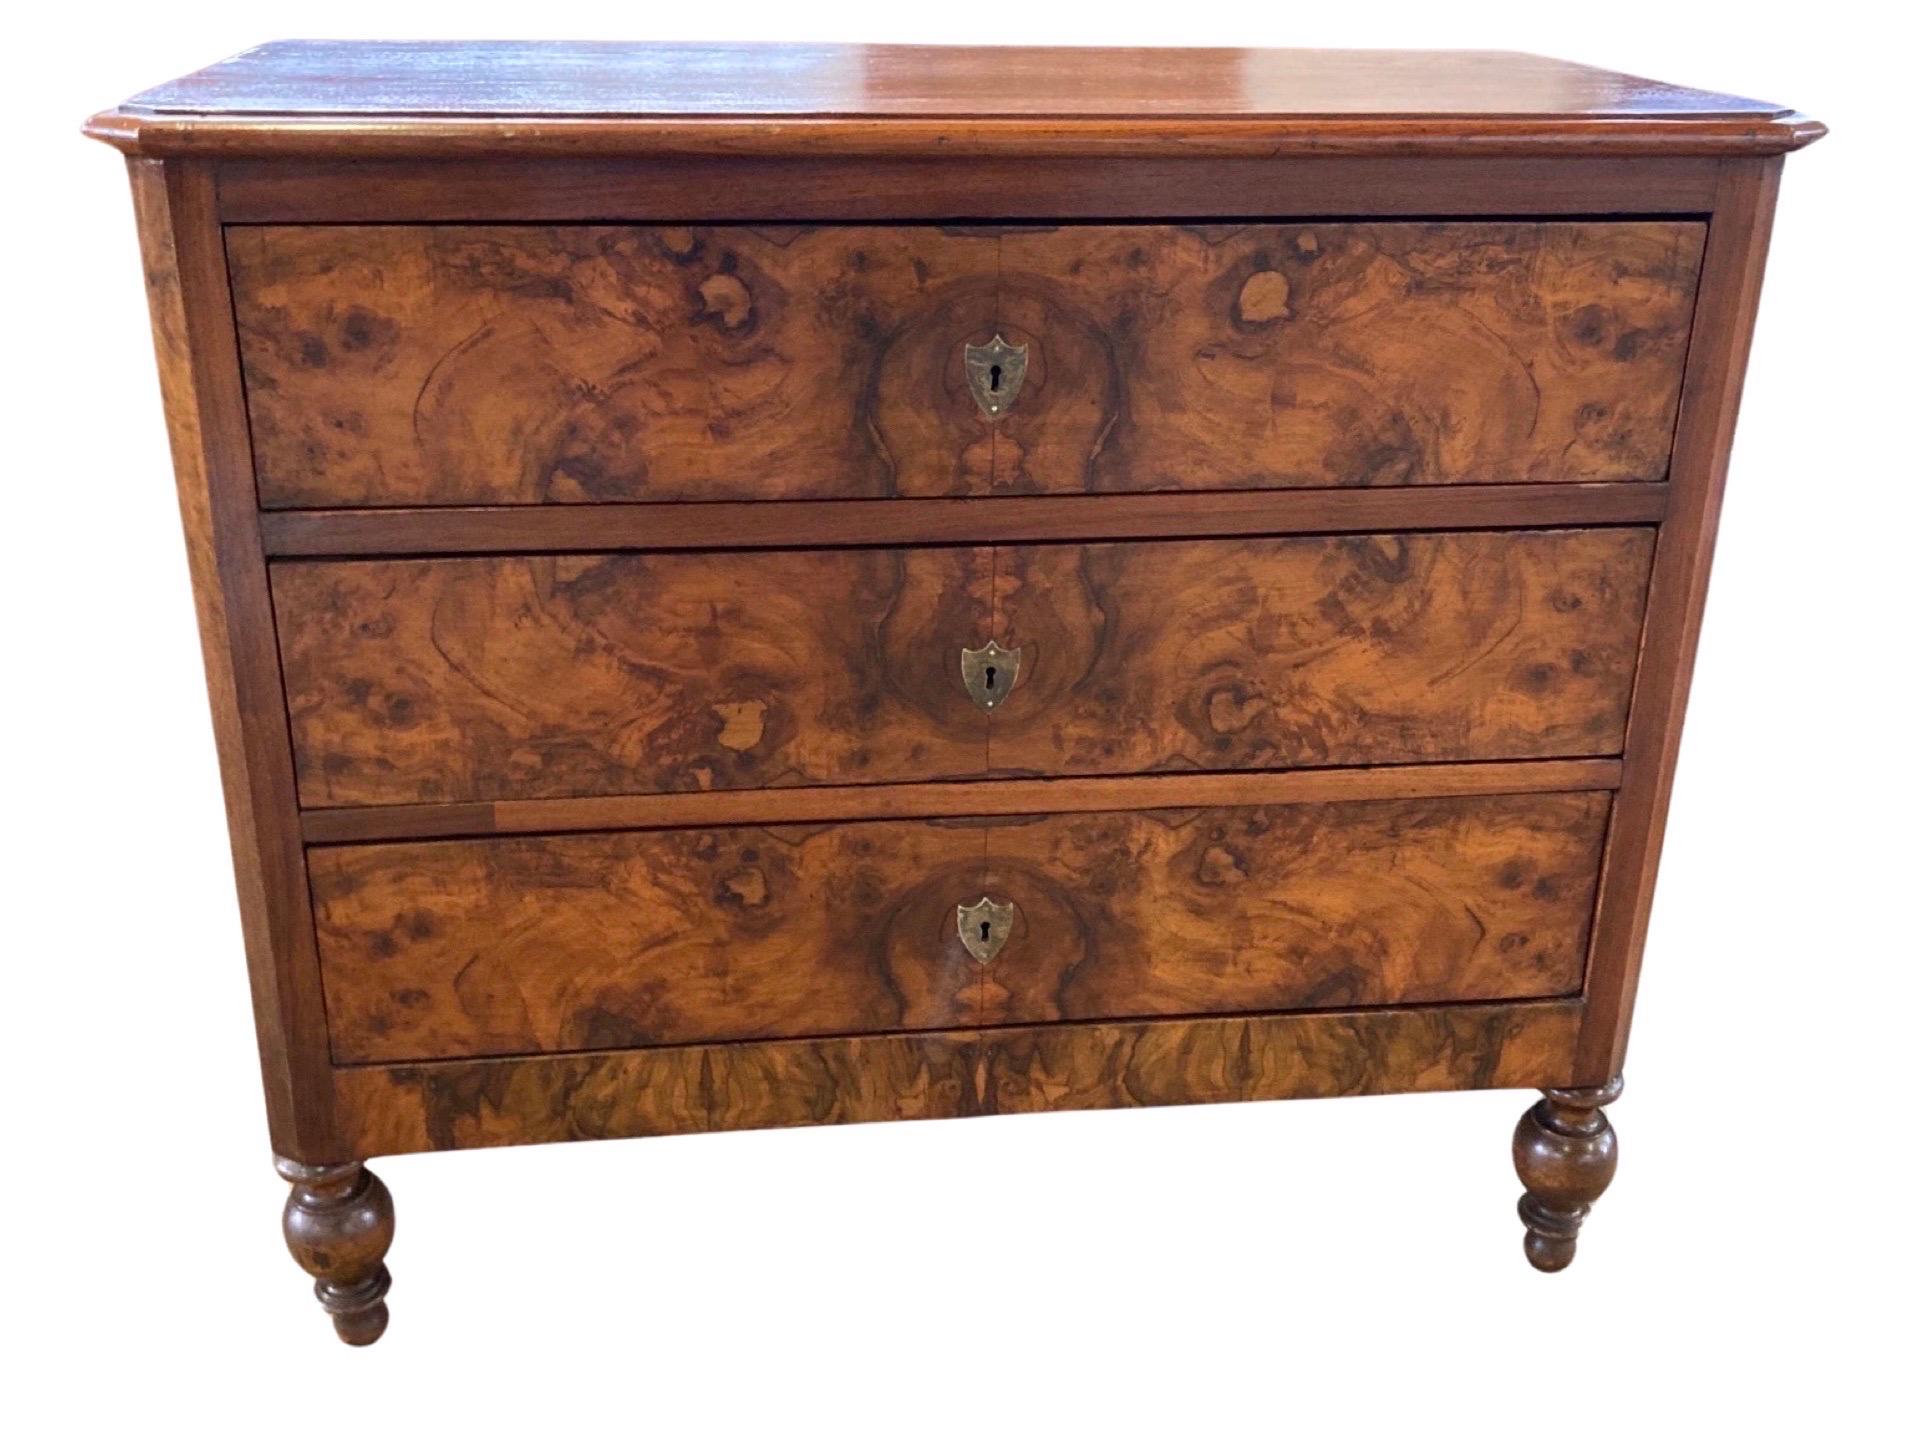 Charles X commode crafted in central Italy in the early 1800s using walnut. This is a beautifully simple commode with straight lines and great proportions. The commode features three inset drawers with beautiful hand-made dovetail joints and drawer